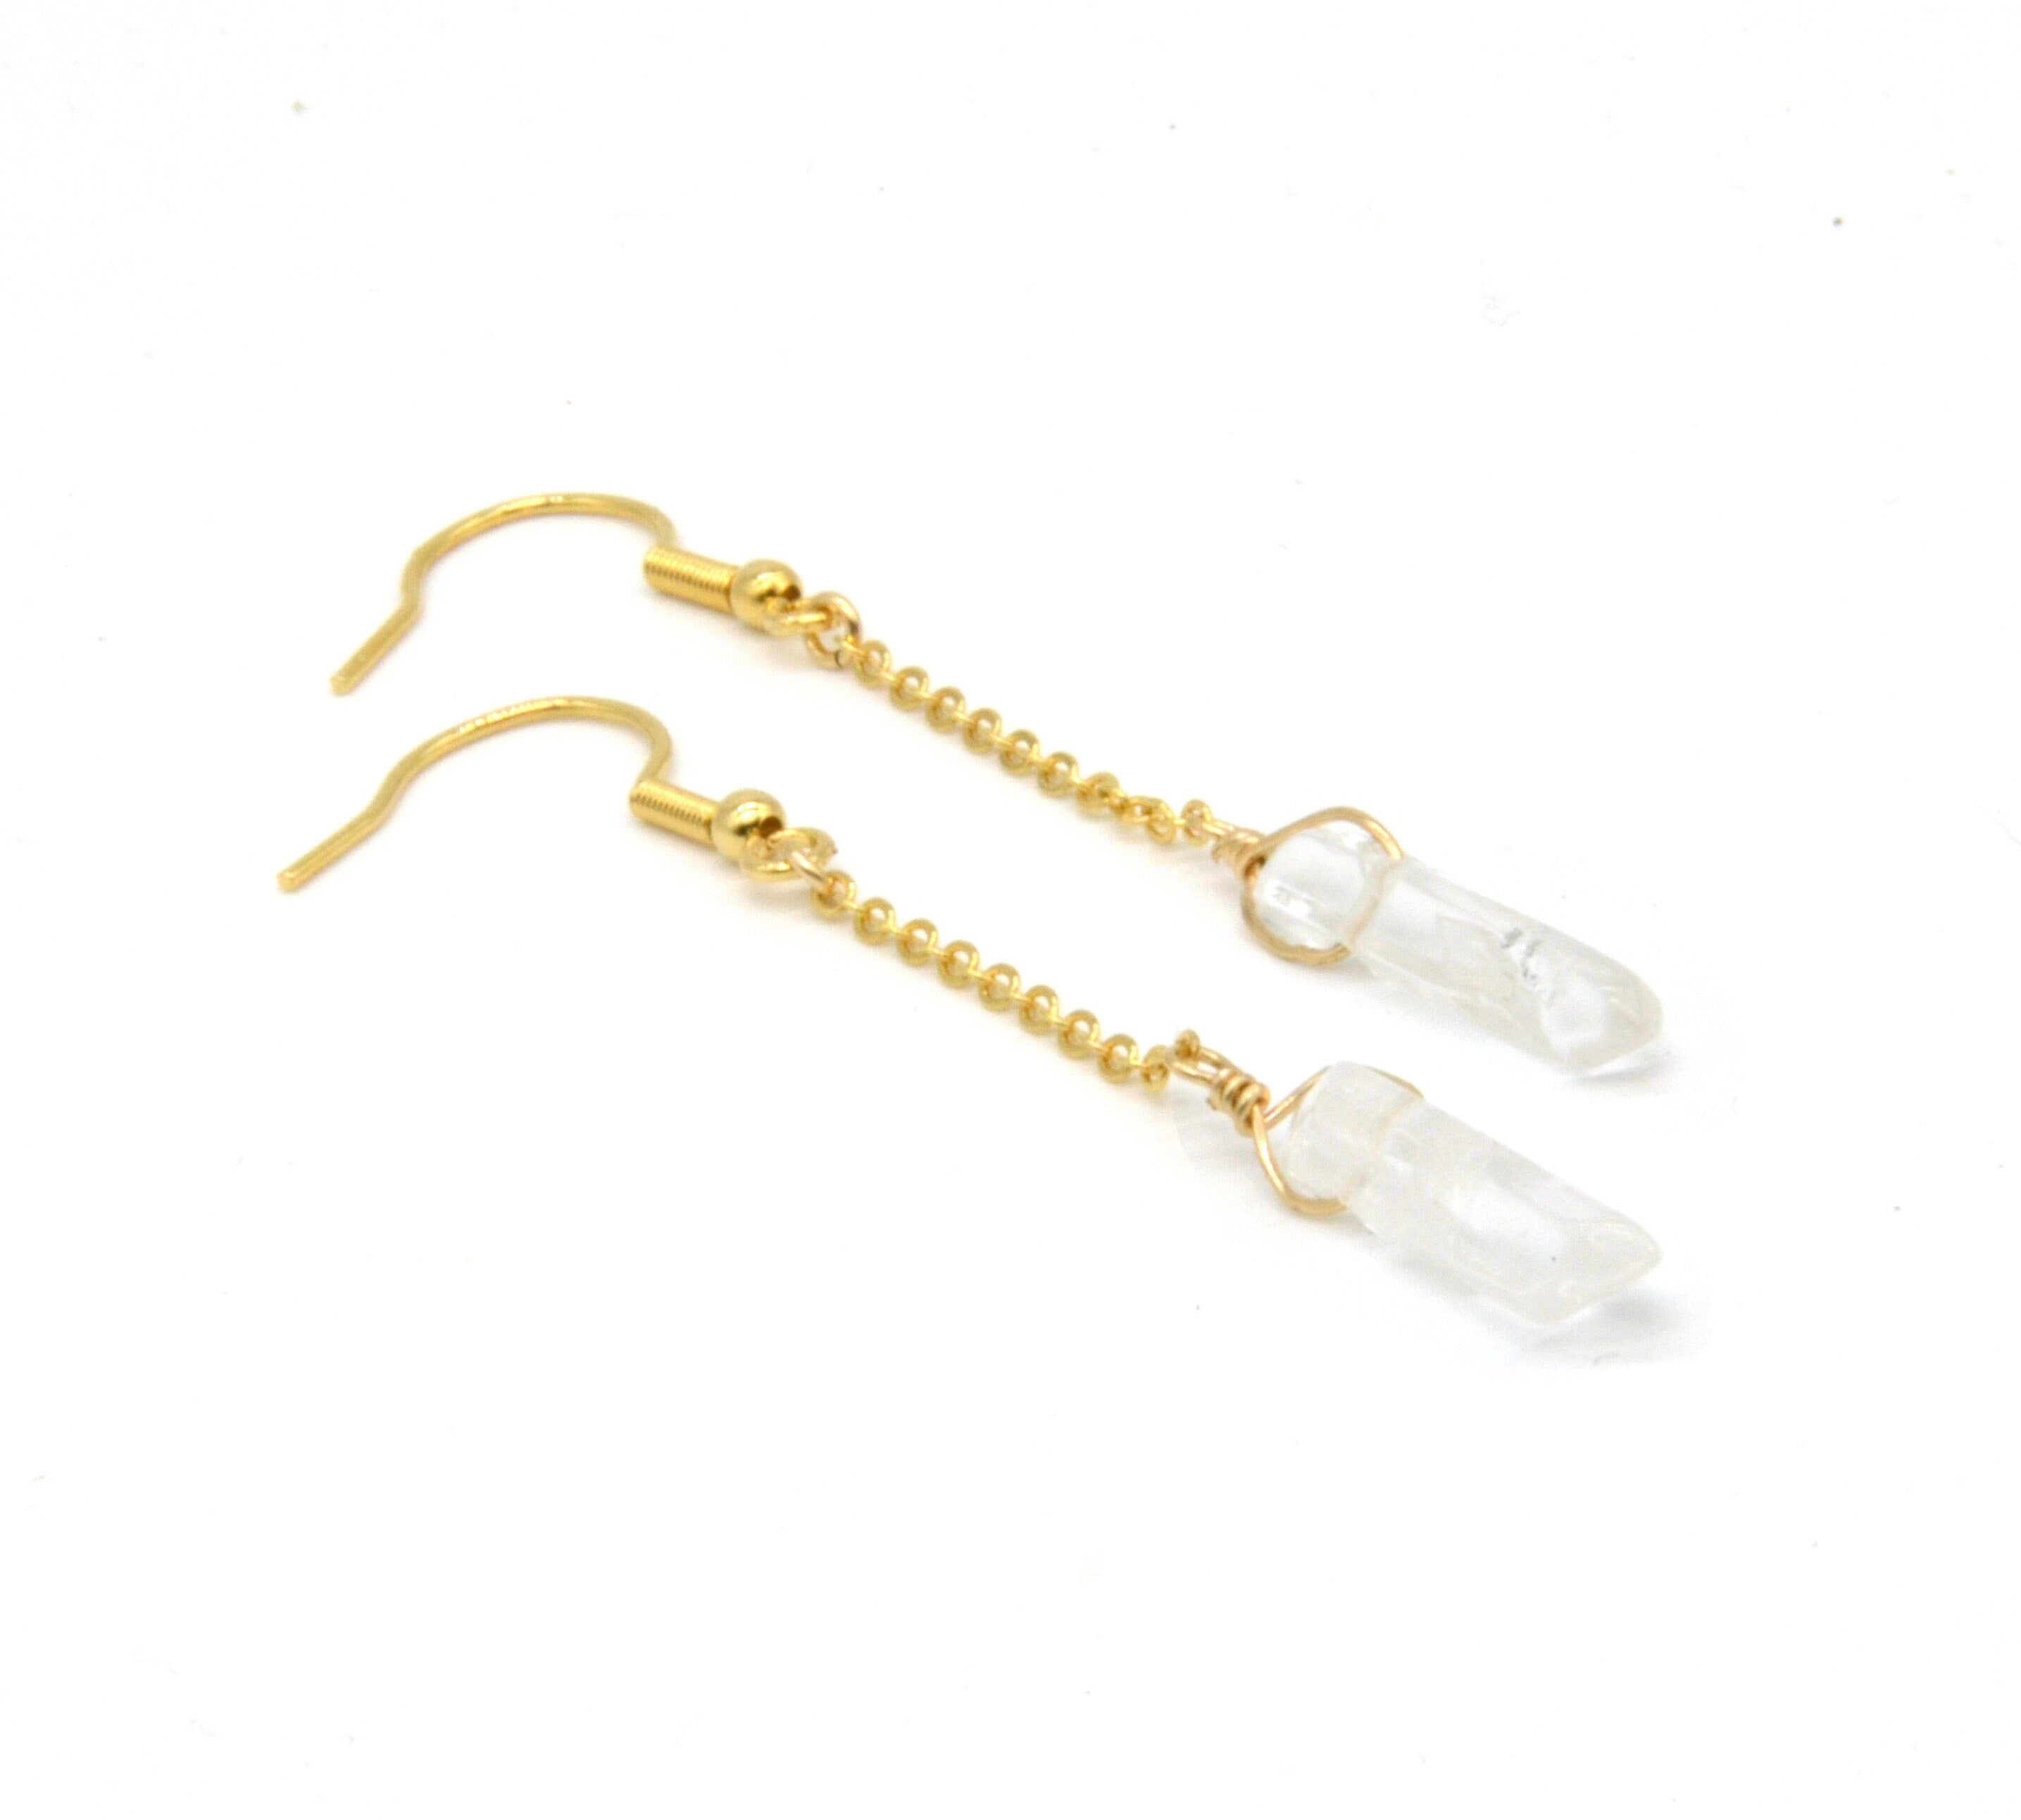 Hanging earrings gold with rock crystals